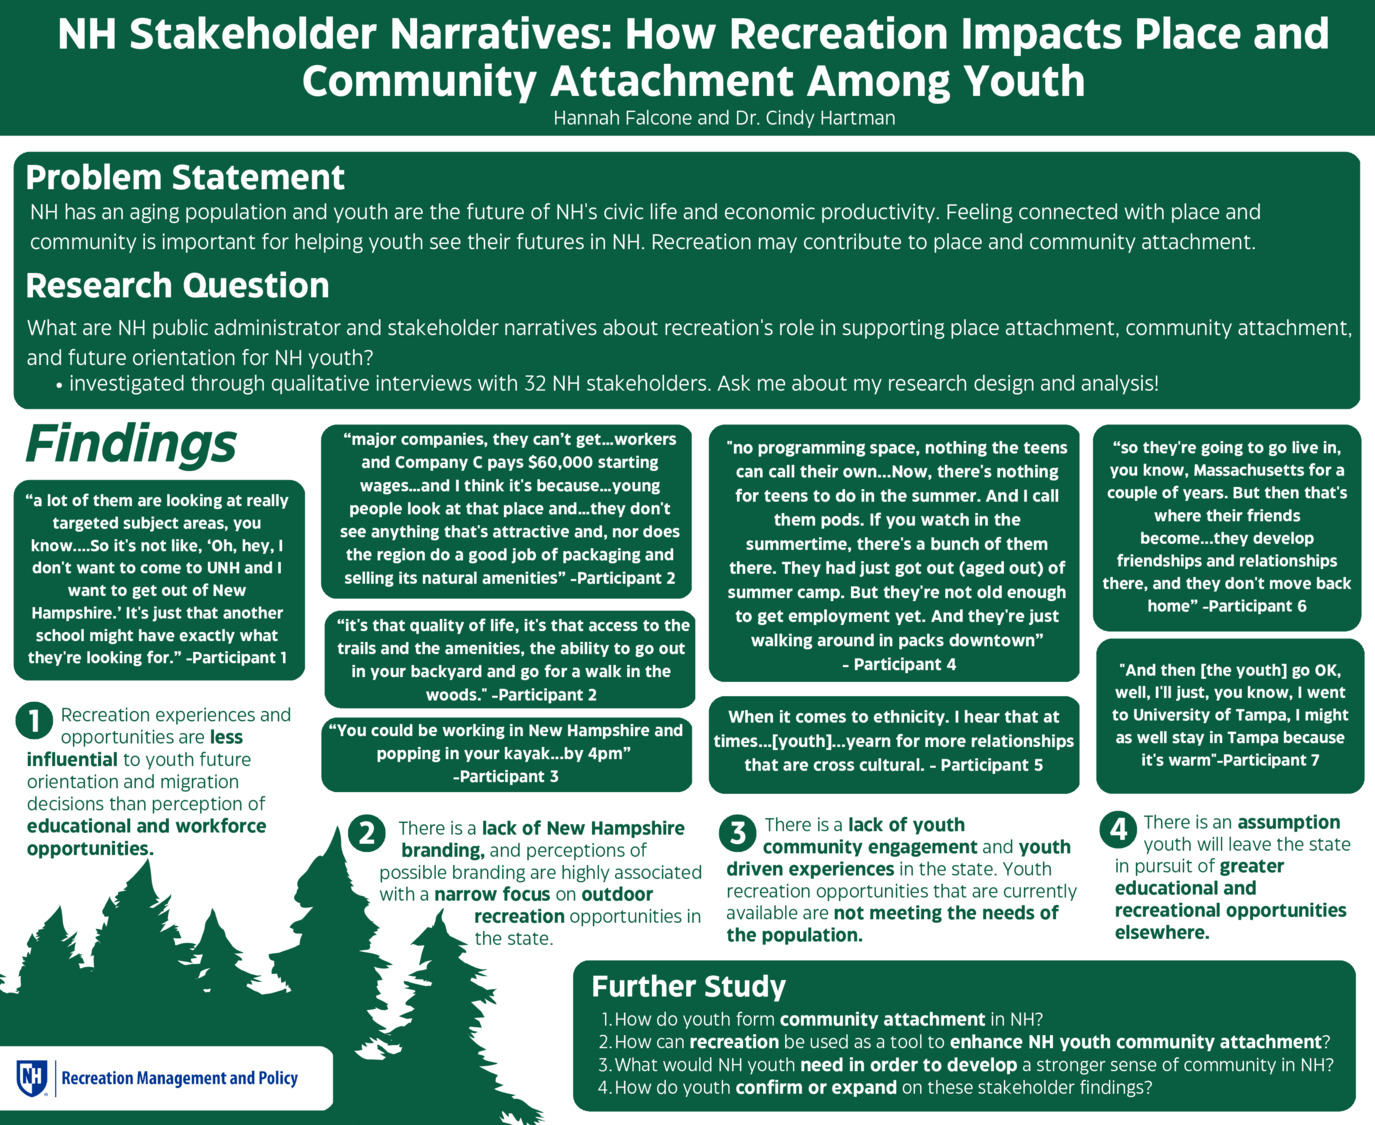 Nh Stakeholder Narratives: How Recreation Impacts Place And Community Attachment Among Youth by hf1026